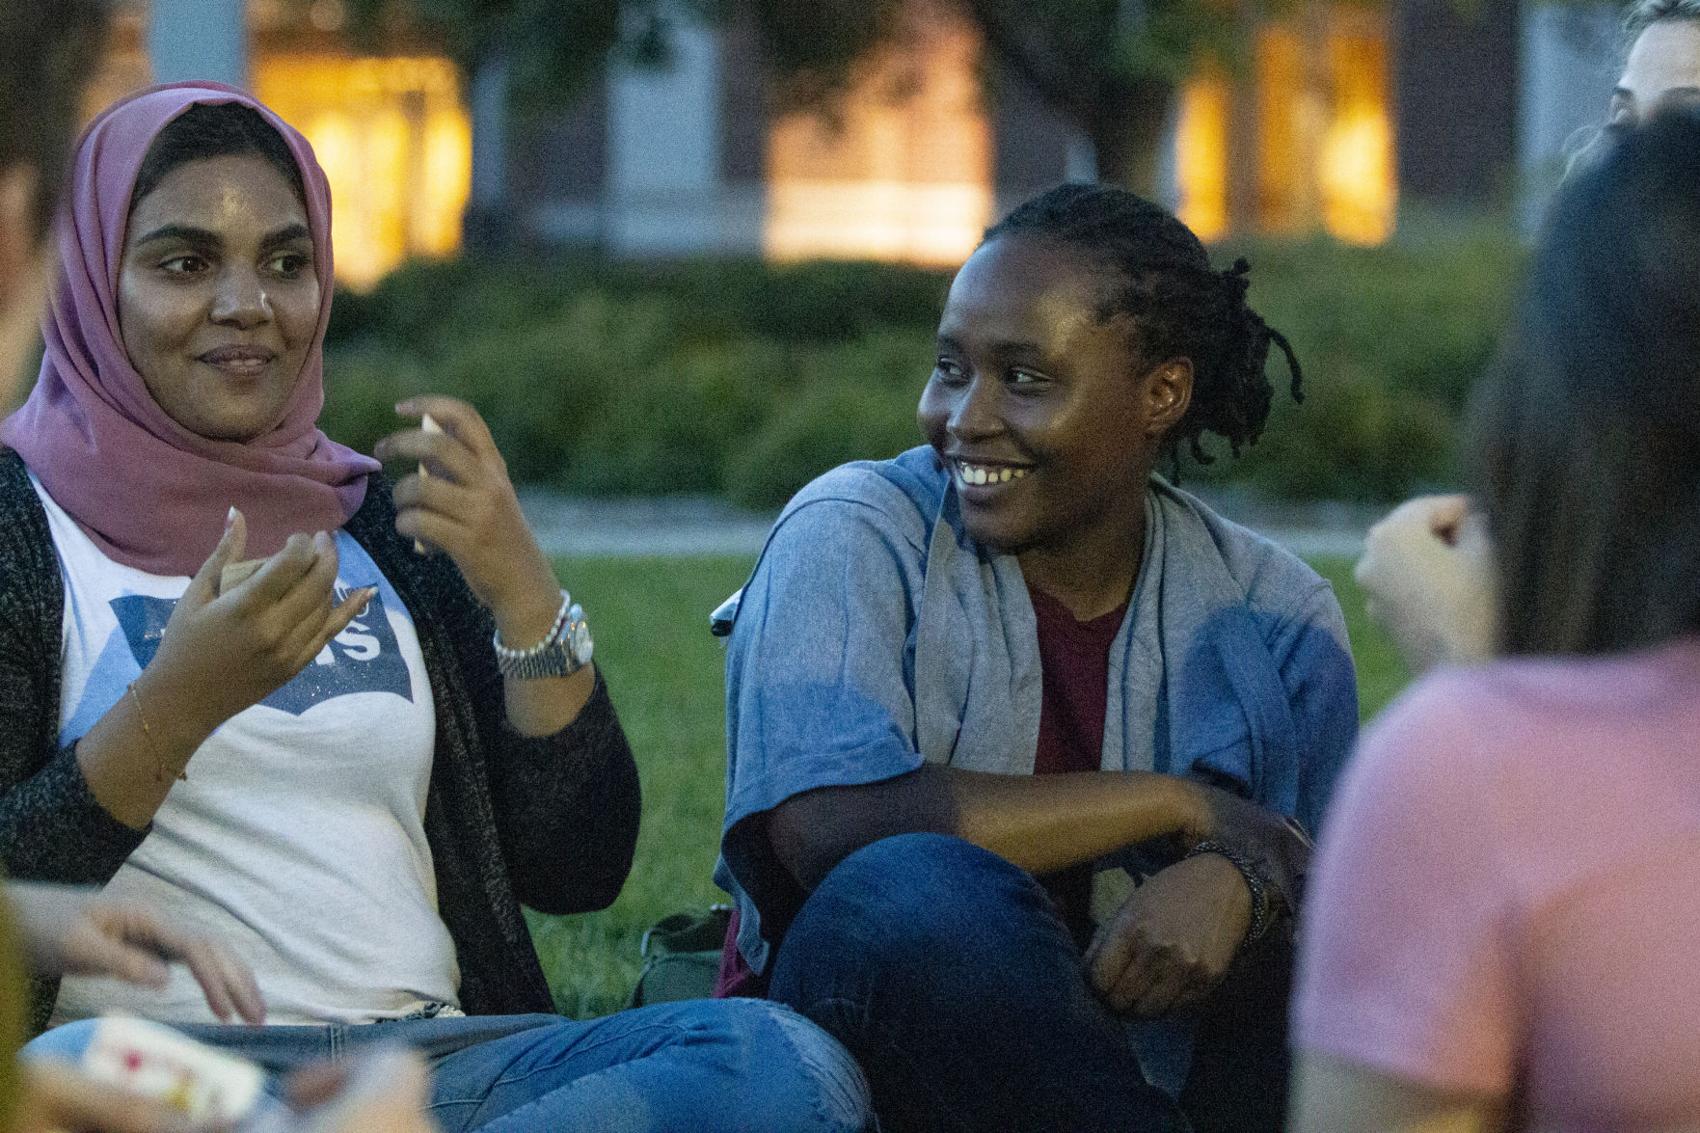 Julienne Irihose (right) reacts to Sara Alhuraizi (left) at the International Club meeting on the green space in front of the Union on University of Nebraska-Lincoln's city campus. Photo: The Daily Nebraskan.